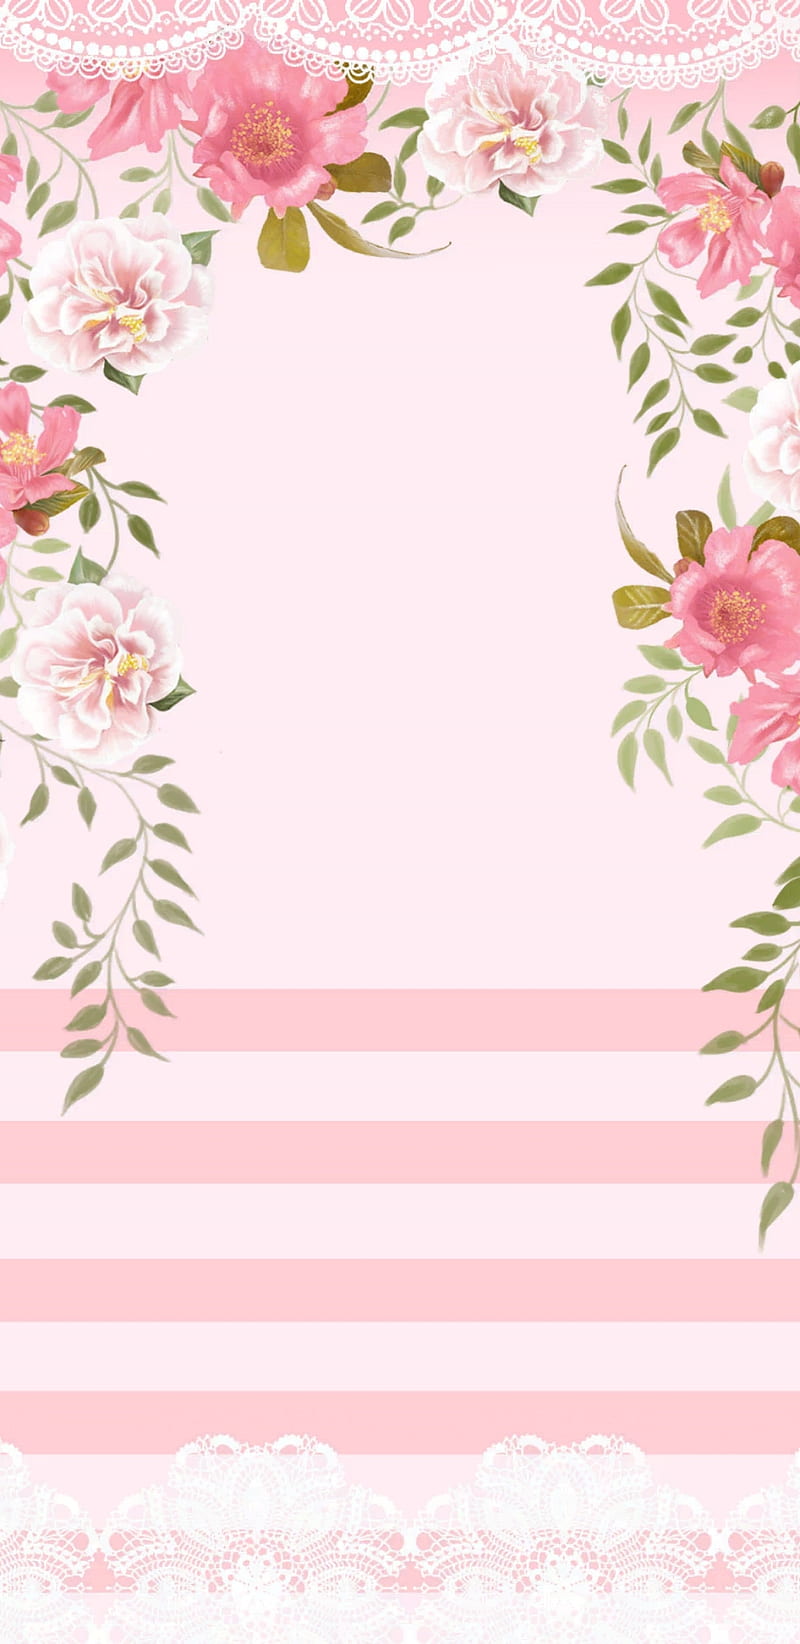 girly vintage backgrounds hd